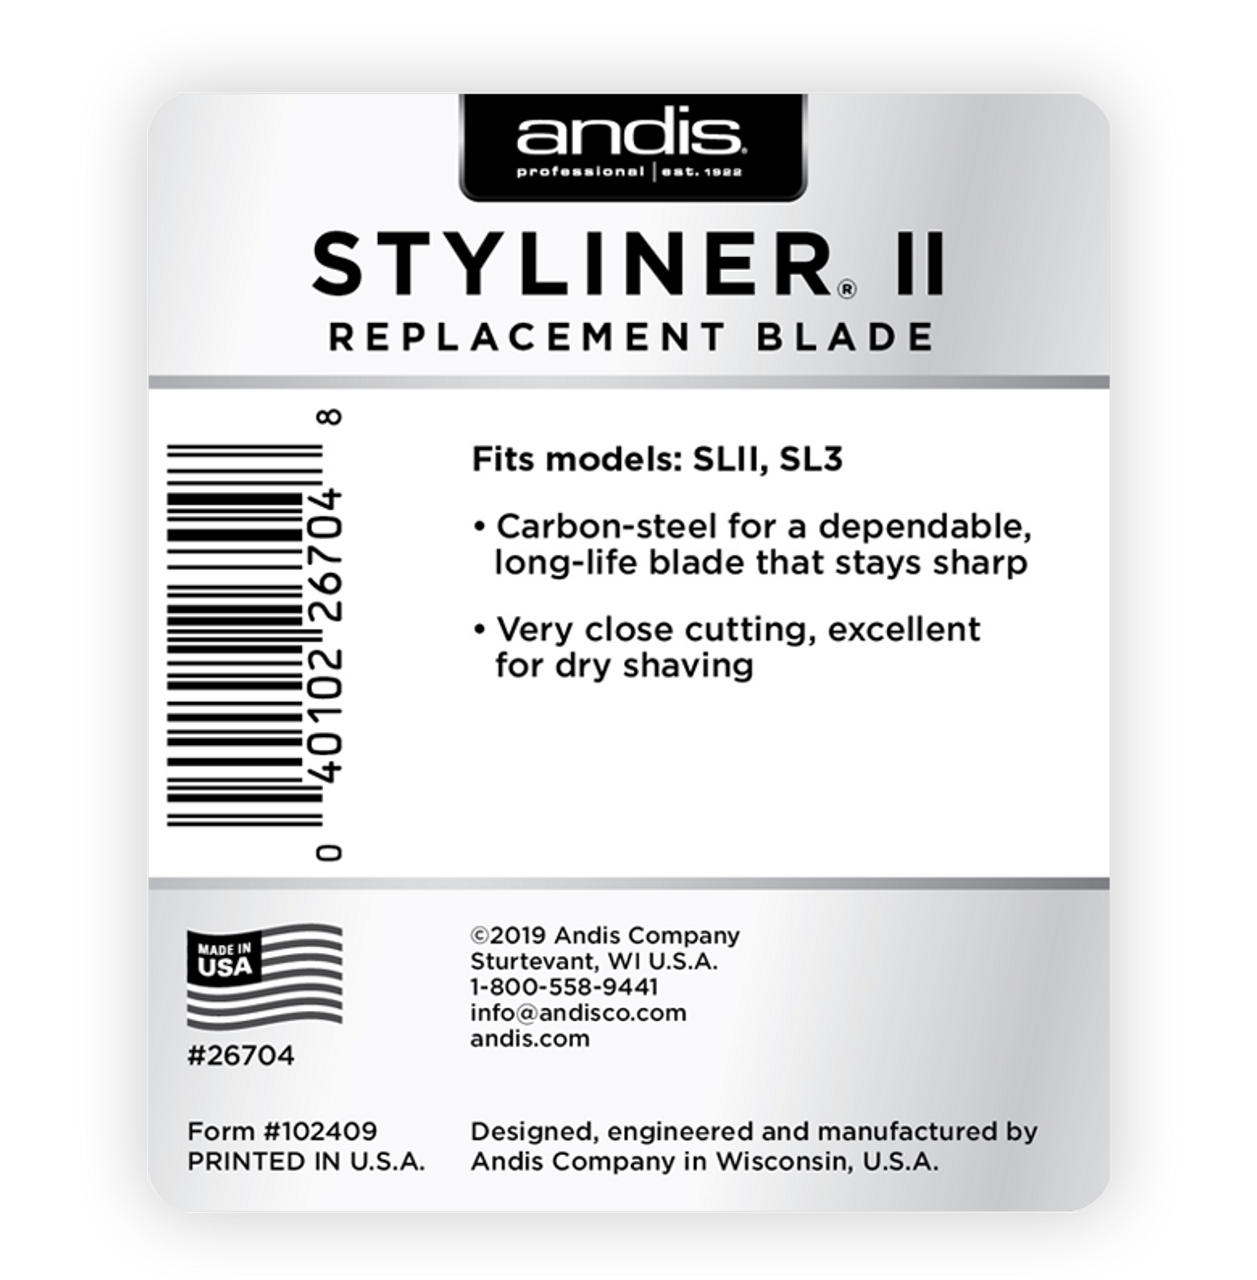 styliner 2 replacement blade